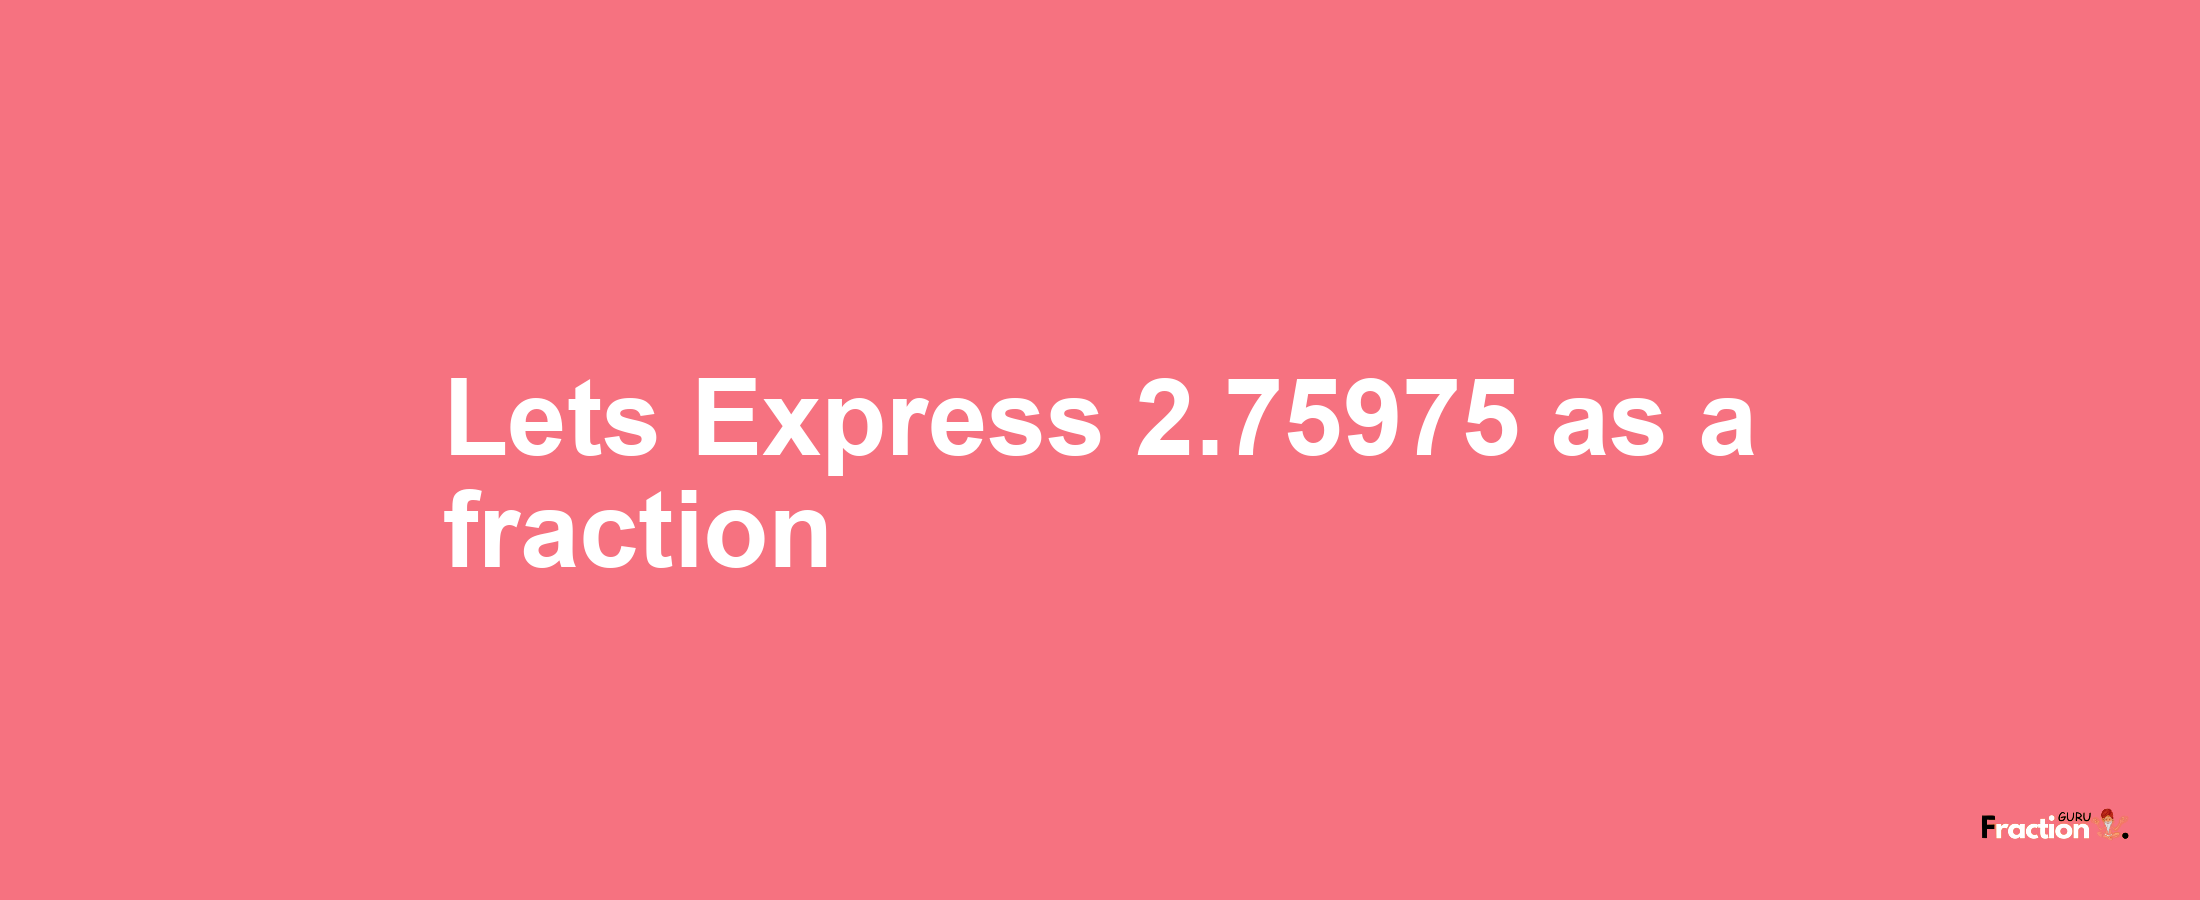 Lets Express 2.75975 as afraction